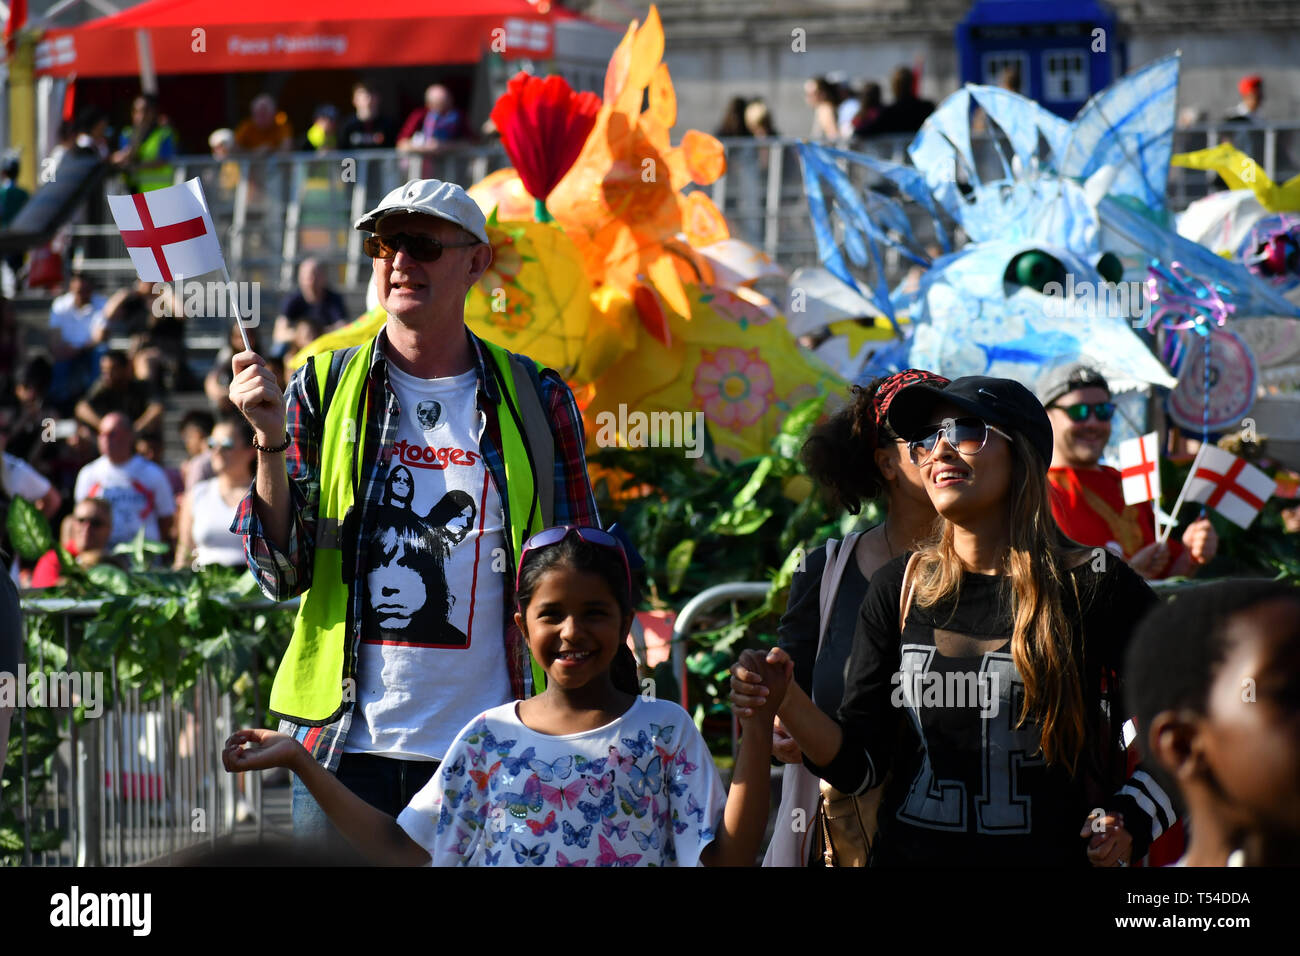 London, UK. 20th April, 2019.Feast of St George to celebrate English culture with music and English food stalls in Trafalgar Square on 20 April 2019, London, UK. Credit: Picture Capital/Alamy Live News Stock Photo